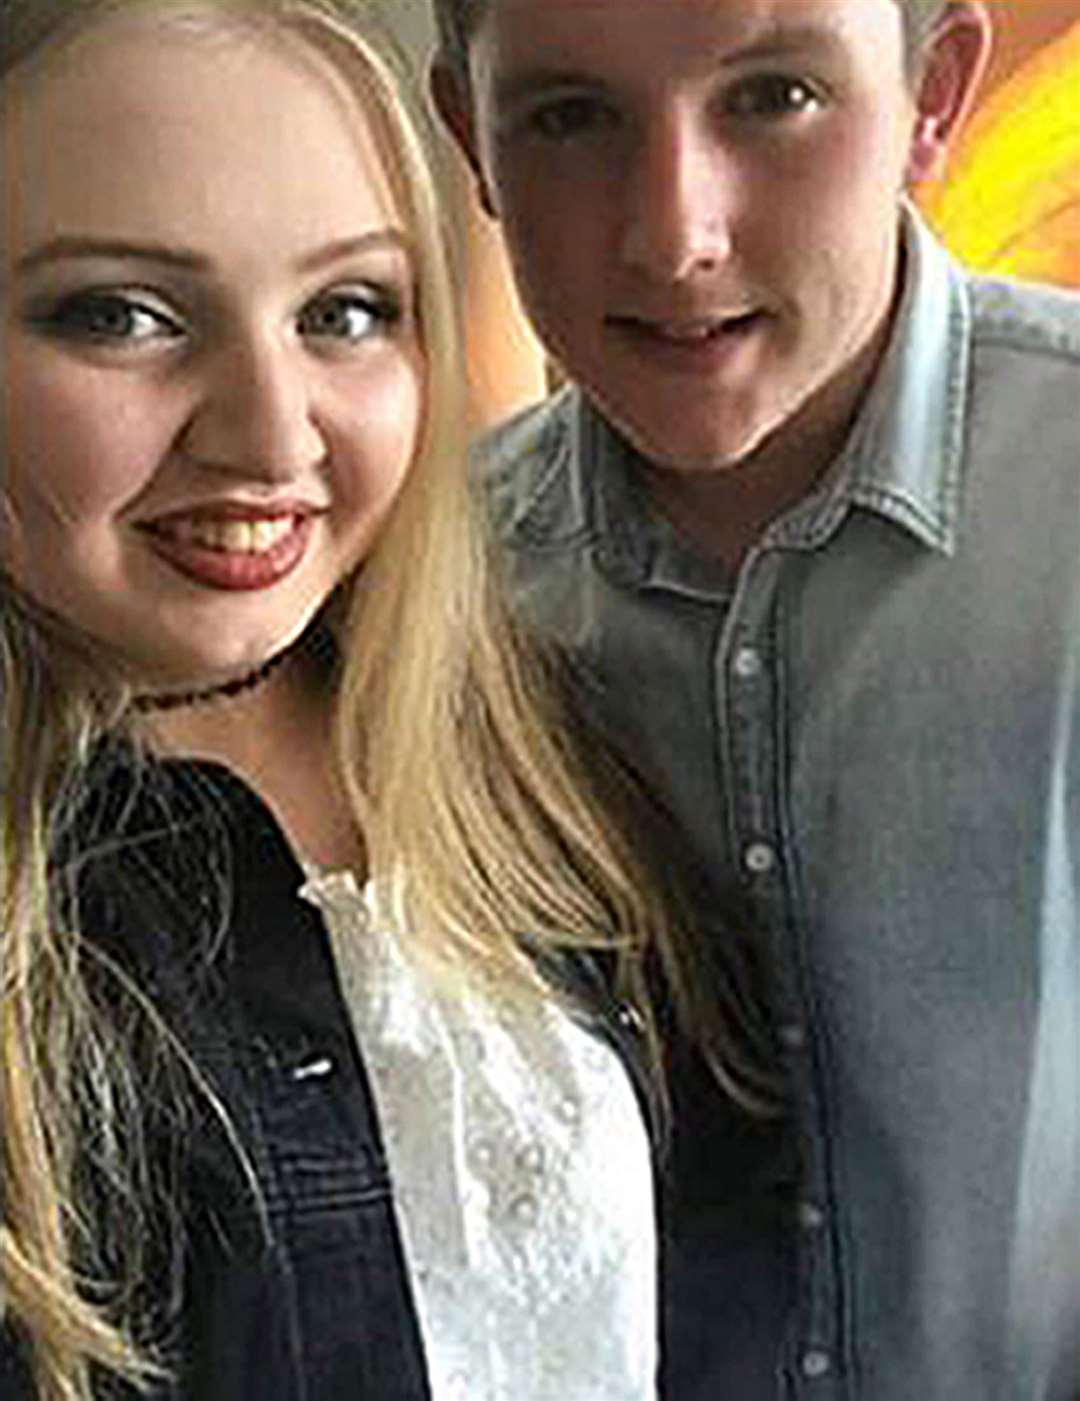 Chloe Rutherford and Liam Curry (Greater Manchester Police/PA)